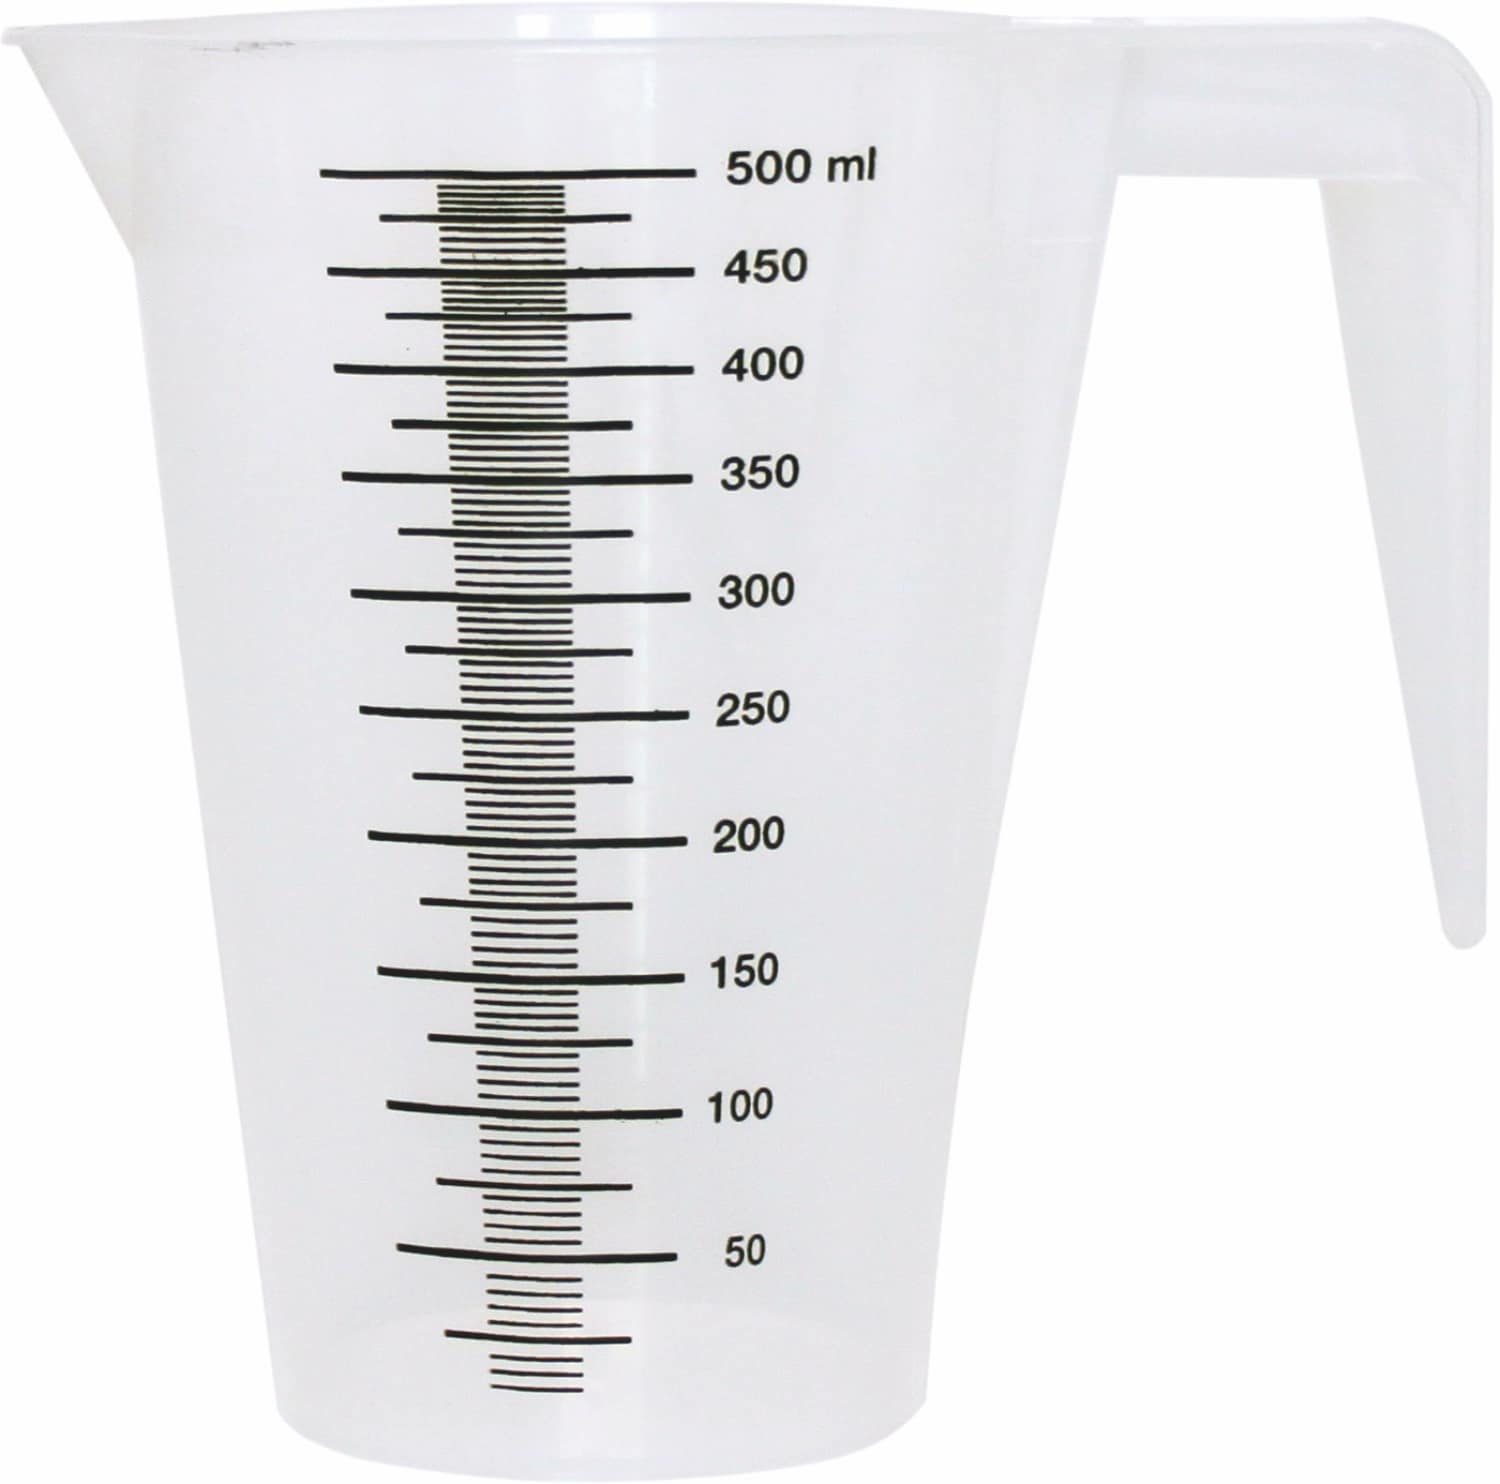 Measuring cups litre and ml scale 200149